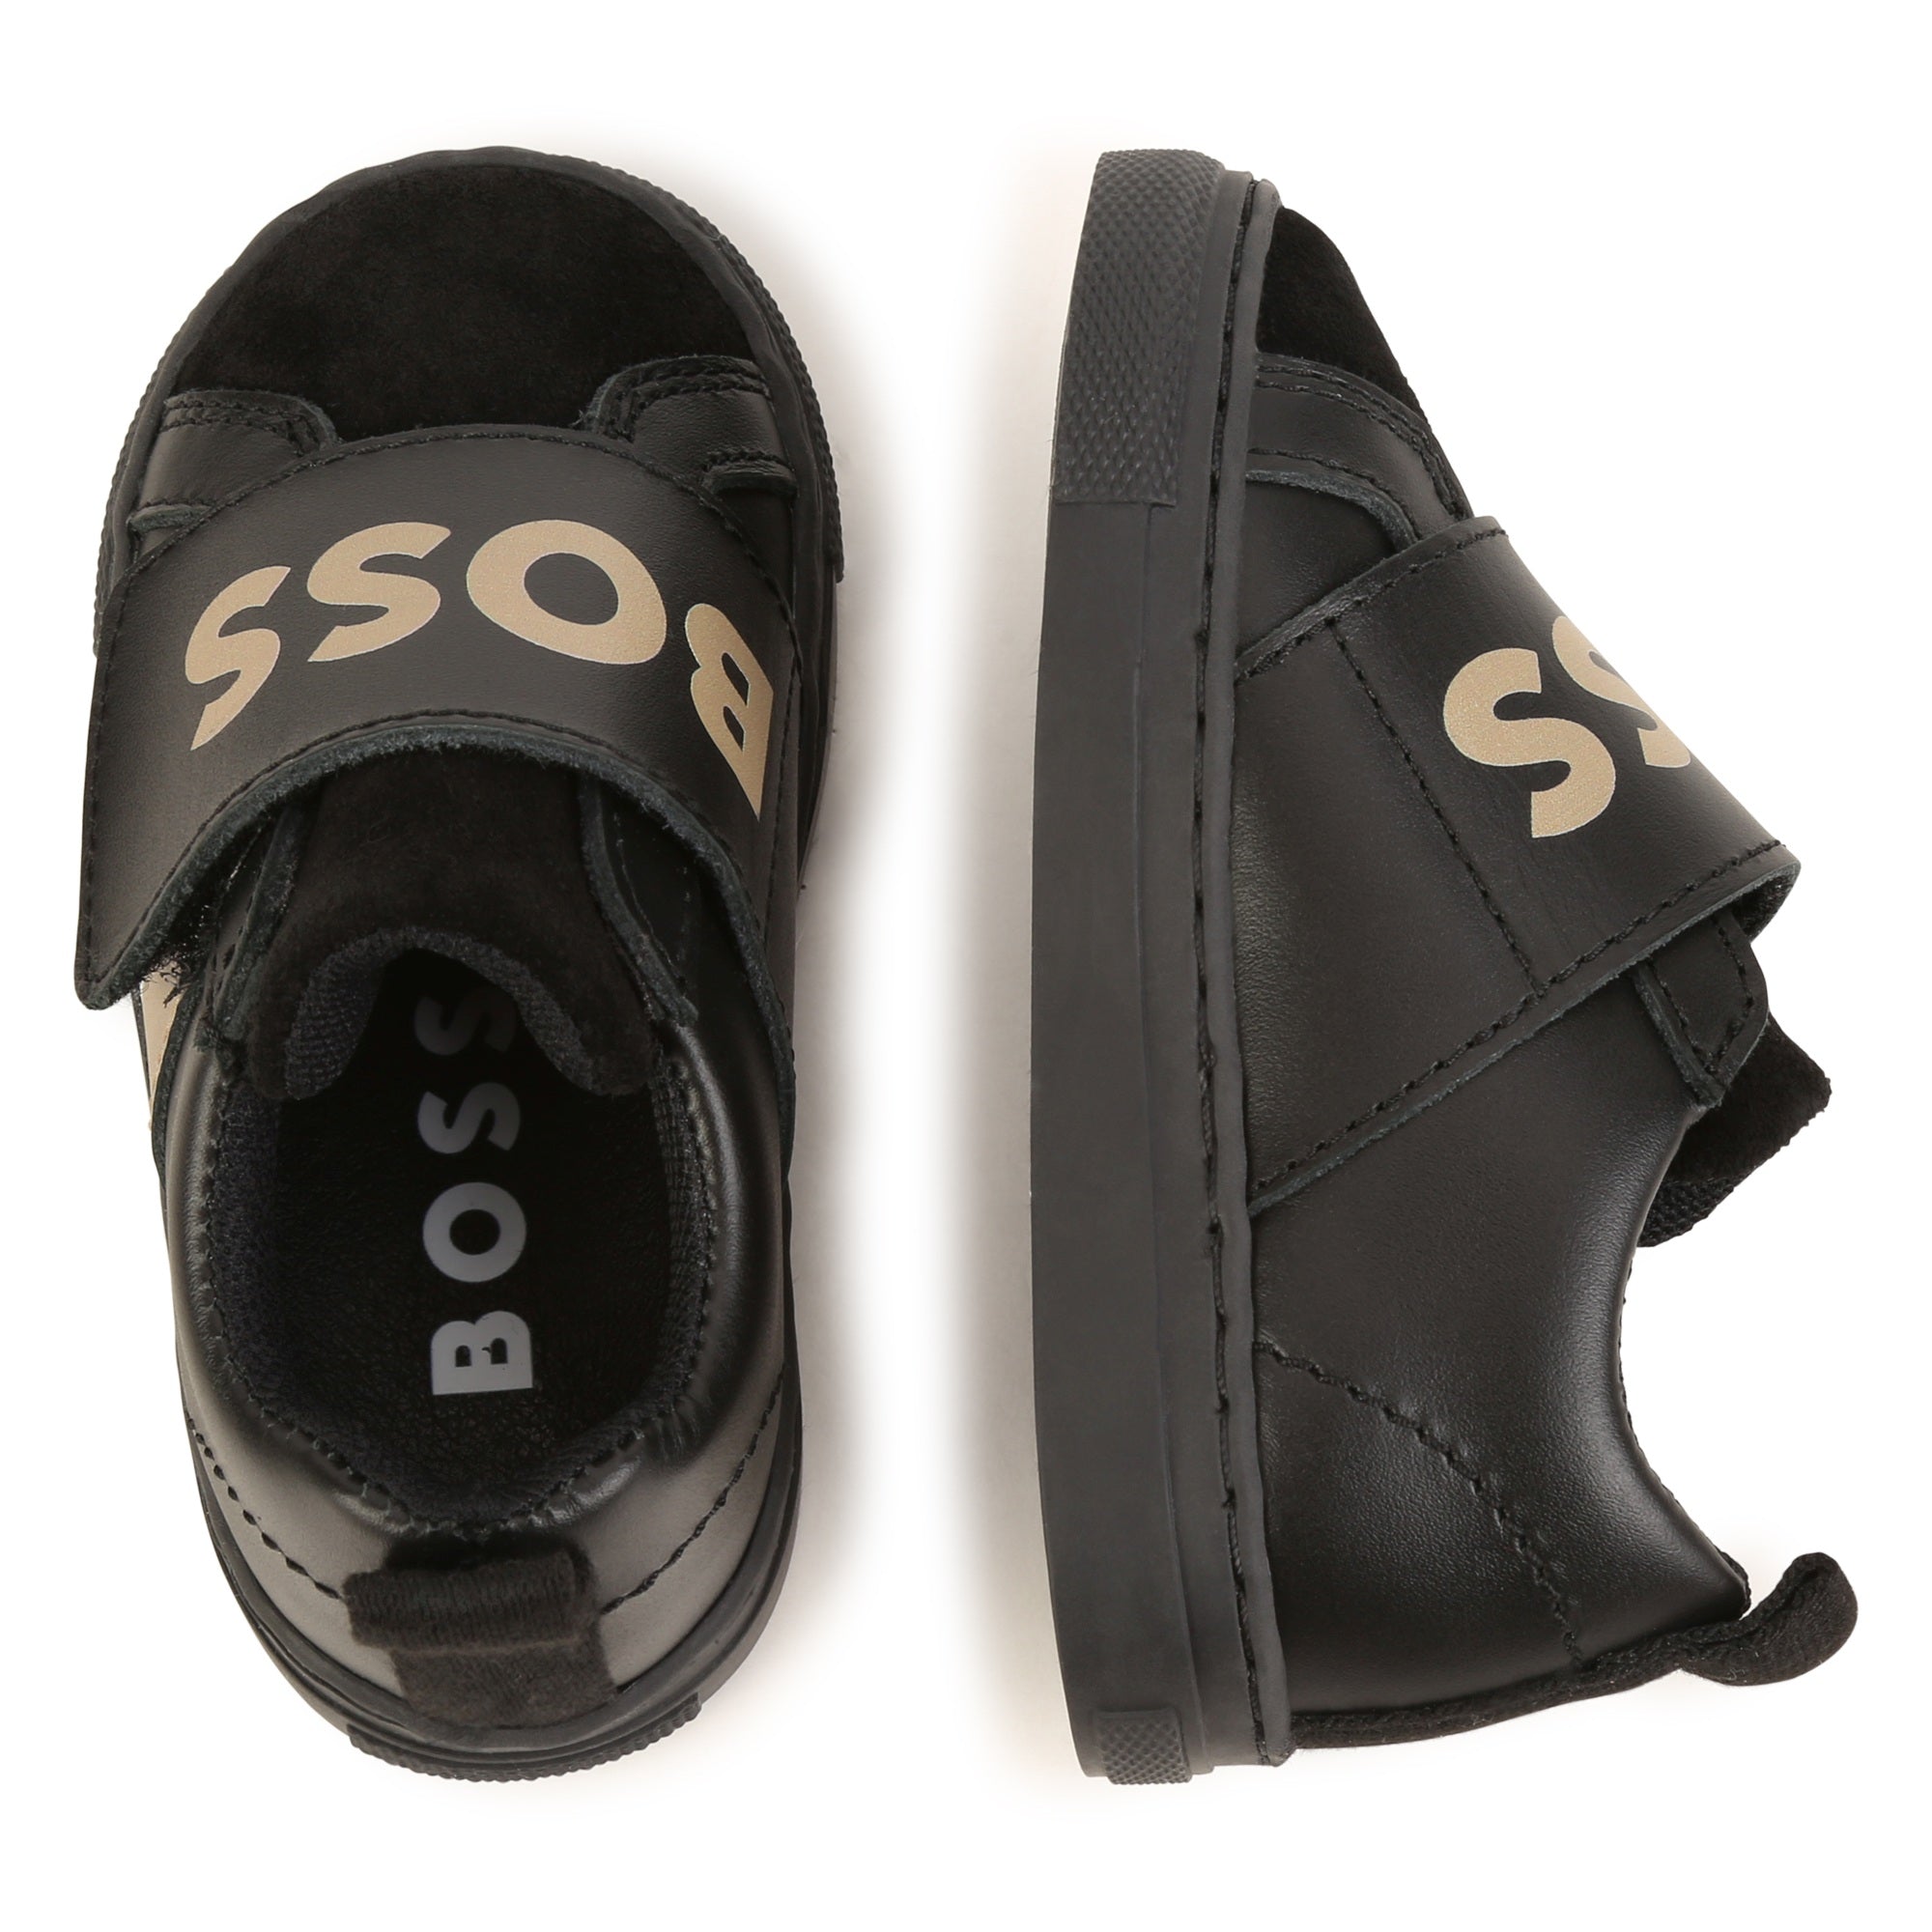 Basket, Sneaker 29 Black 100% Leather - Lining: Outsole: Synthetic